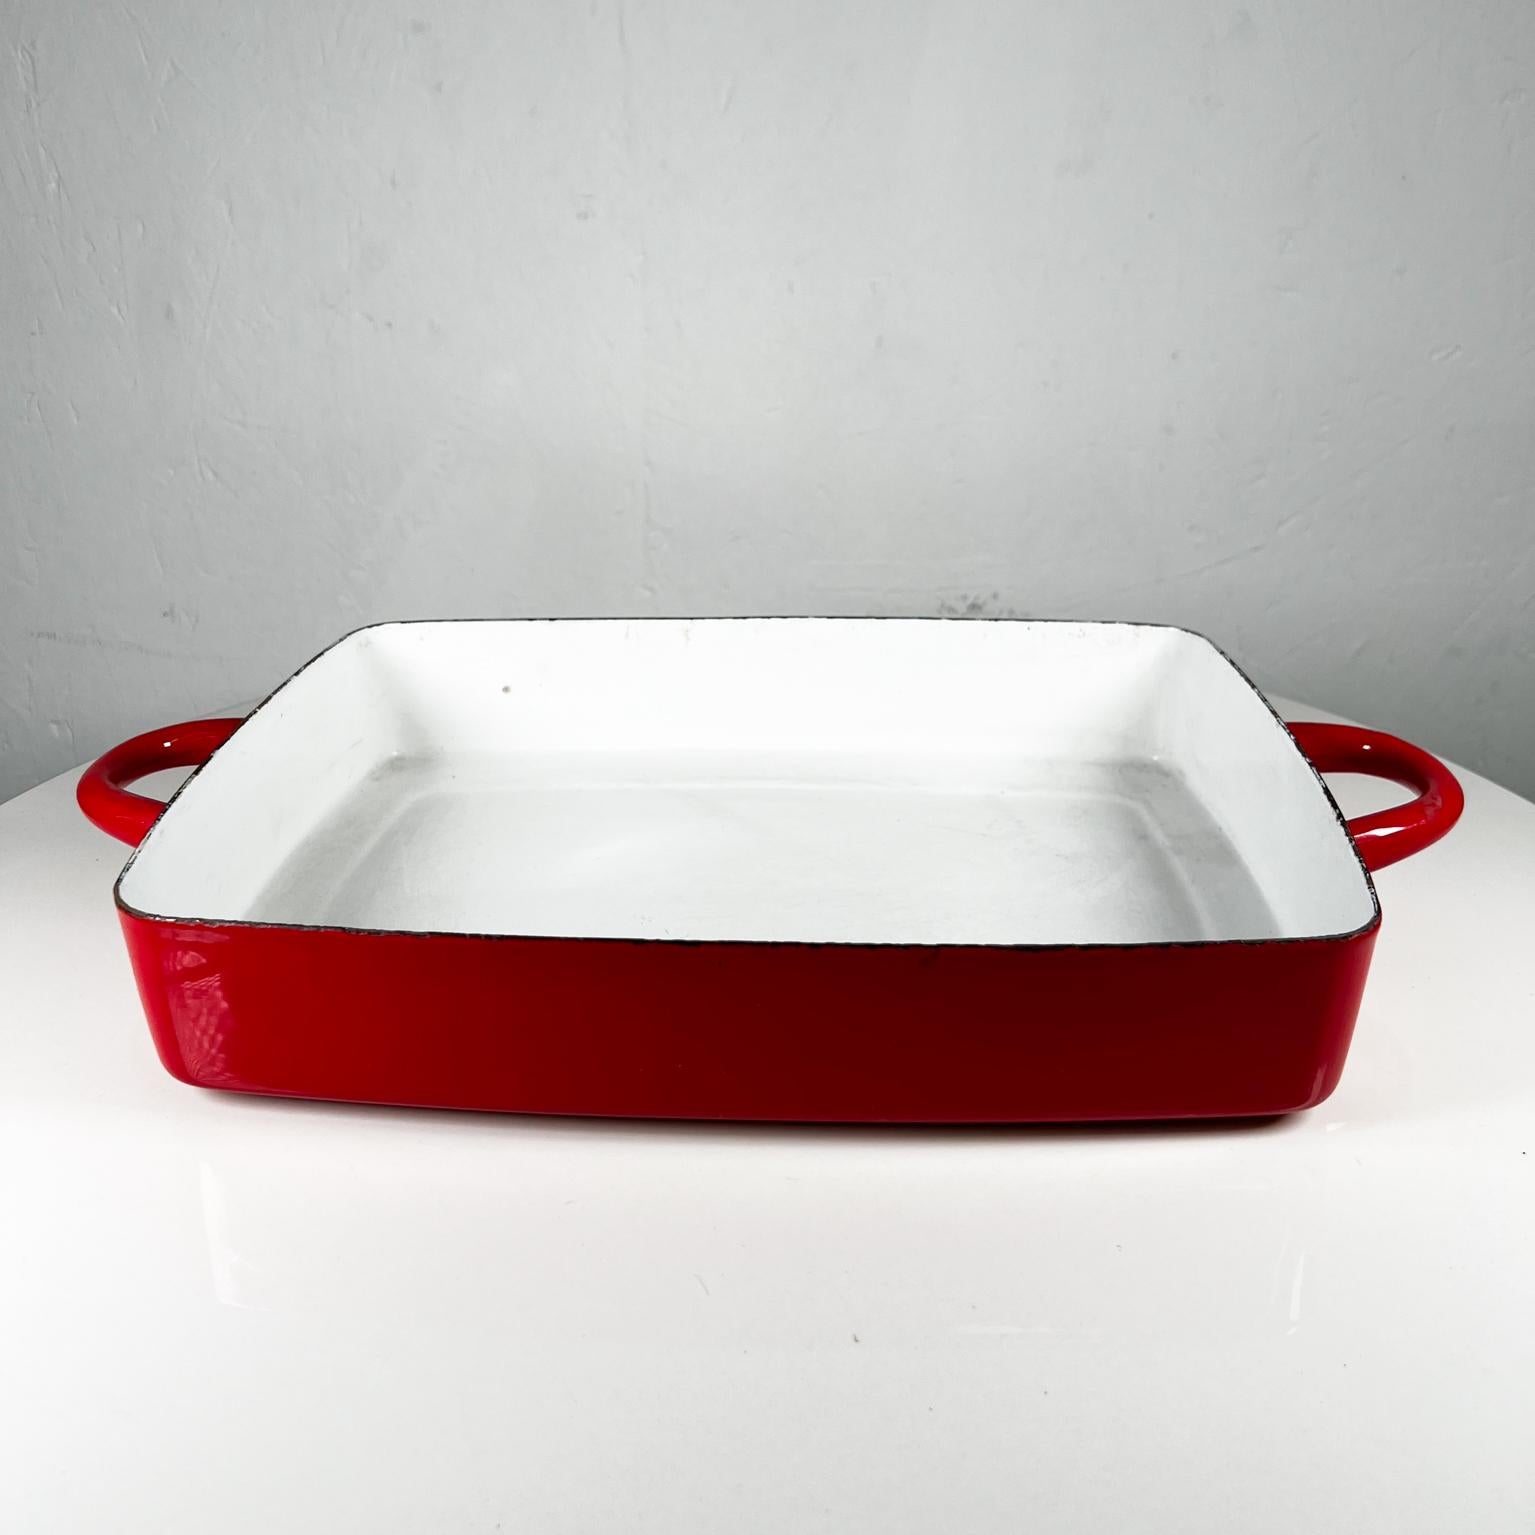 1960s Dansk International Indonesia Baking Dish Red Enamelware Casserole
Vintage Dansk Baking Pan Red and White
9.88 depth x 16.5 width x 2.13 tall
No Lid. Original vintage condition
Not new. Wear present around the edges.
Stamp from the maker